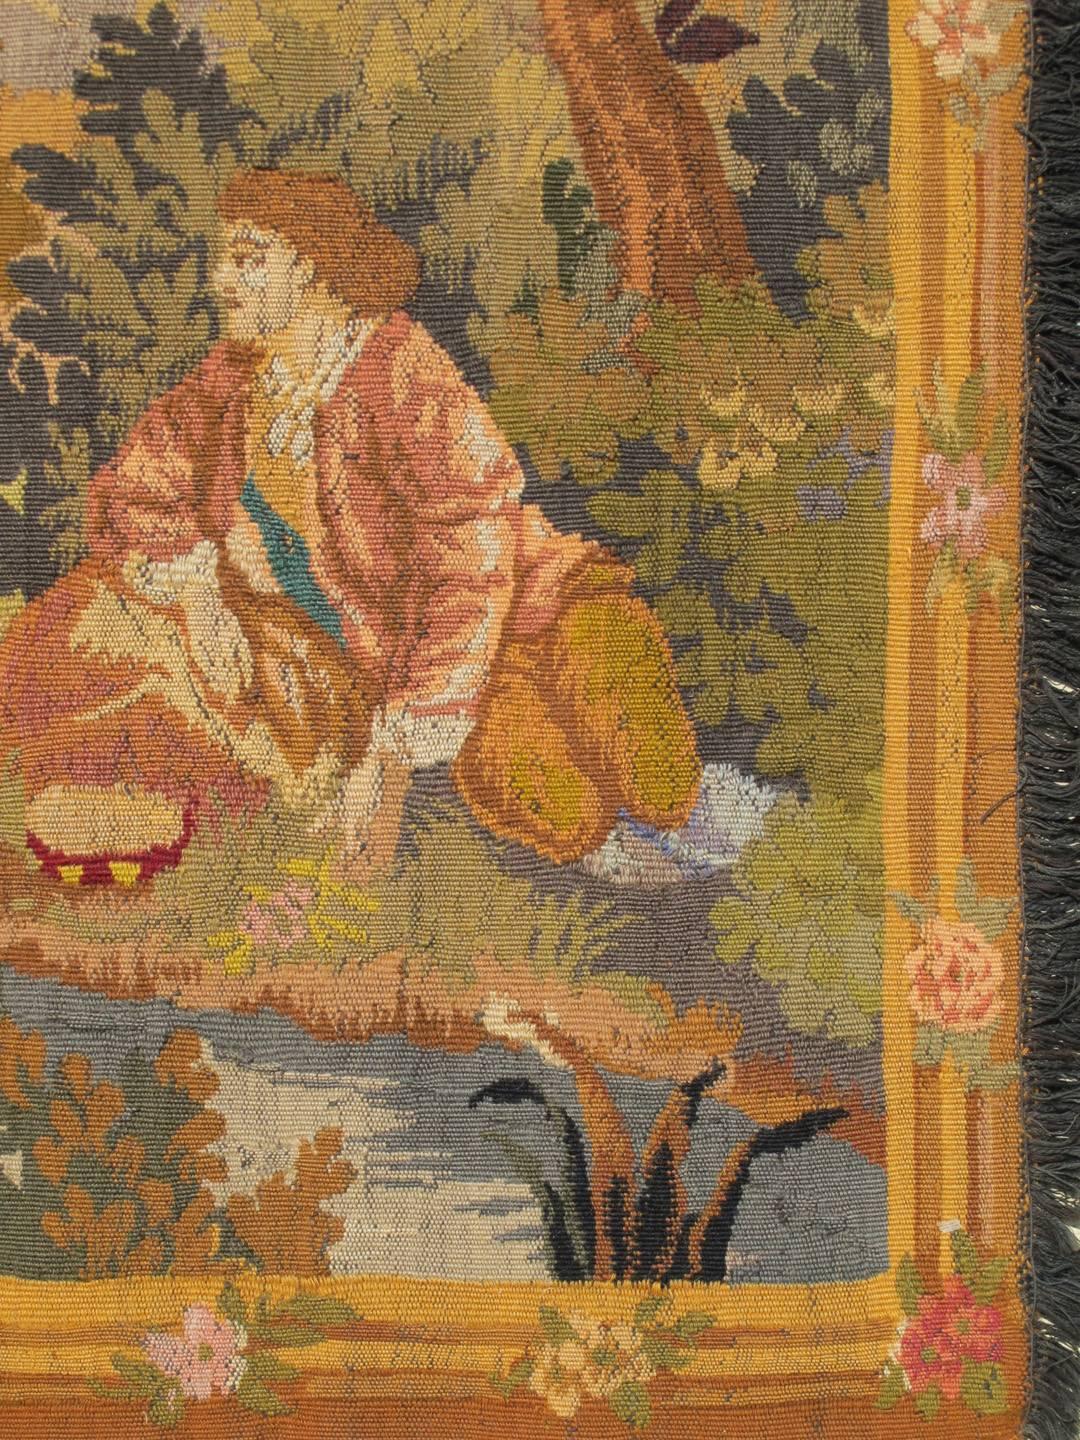 This engaging antique French Tapestry depicts a traditional woodland landscape. The entire scene is set within an abundant woodland setting of trees, bushes and various flora. The weaver’s artistry is further exemplified by the use of a strong and